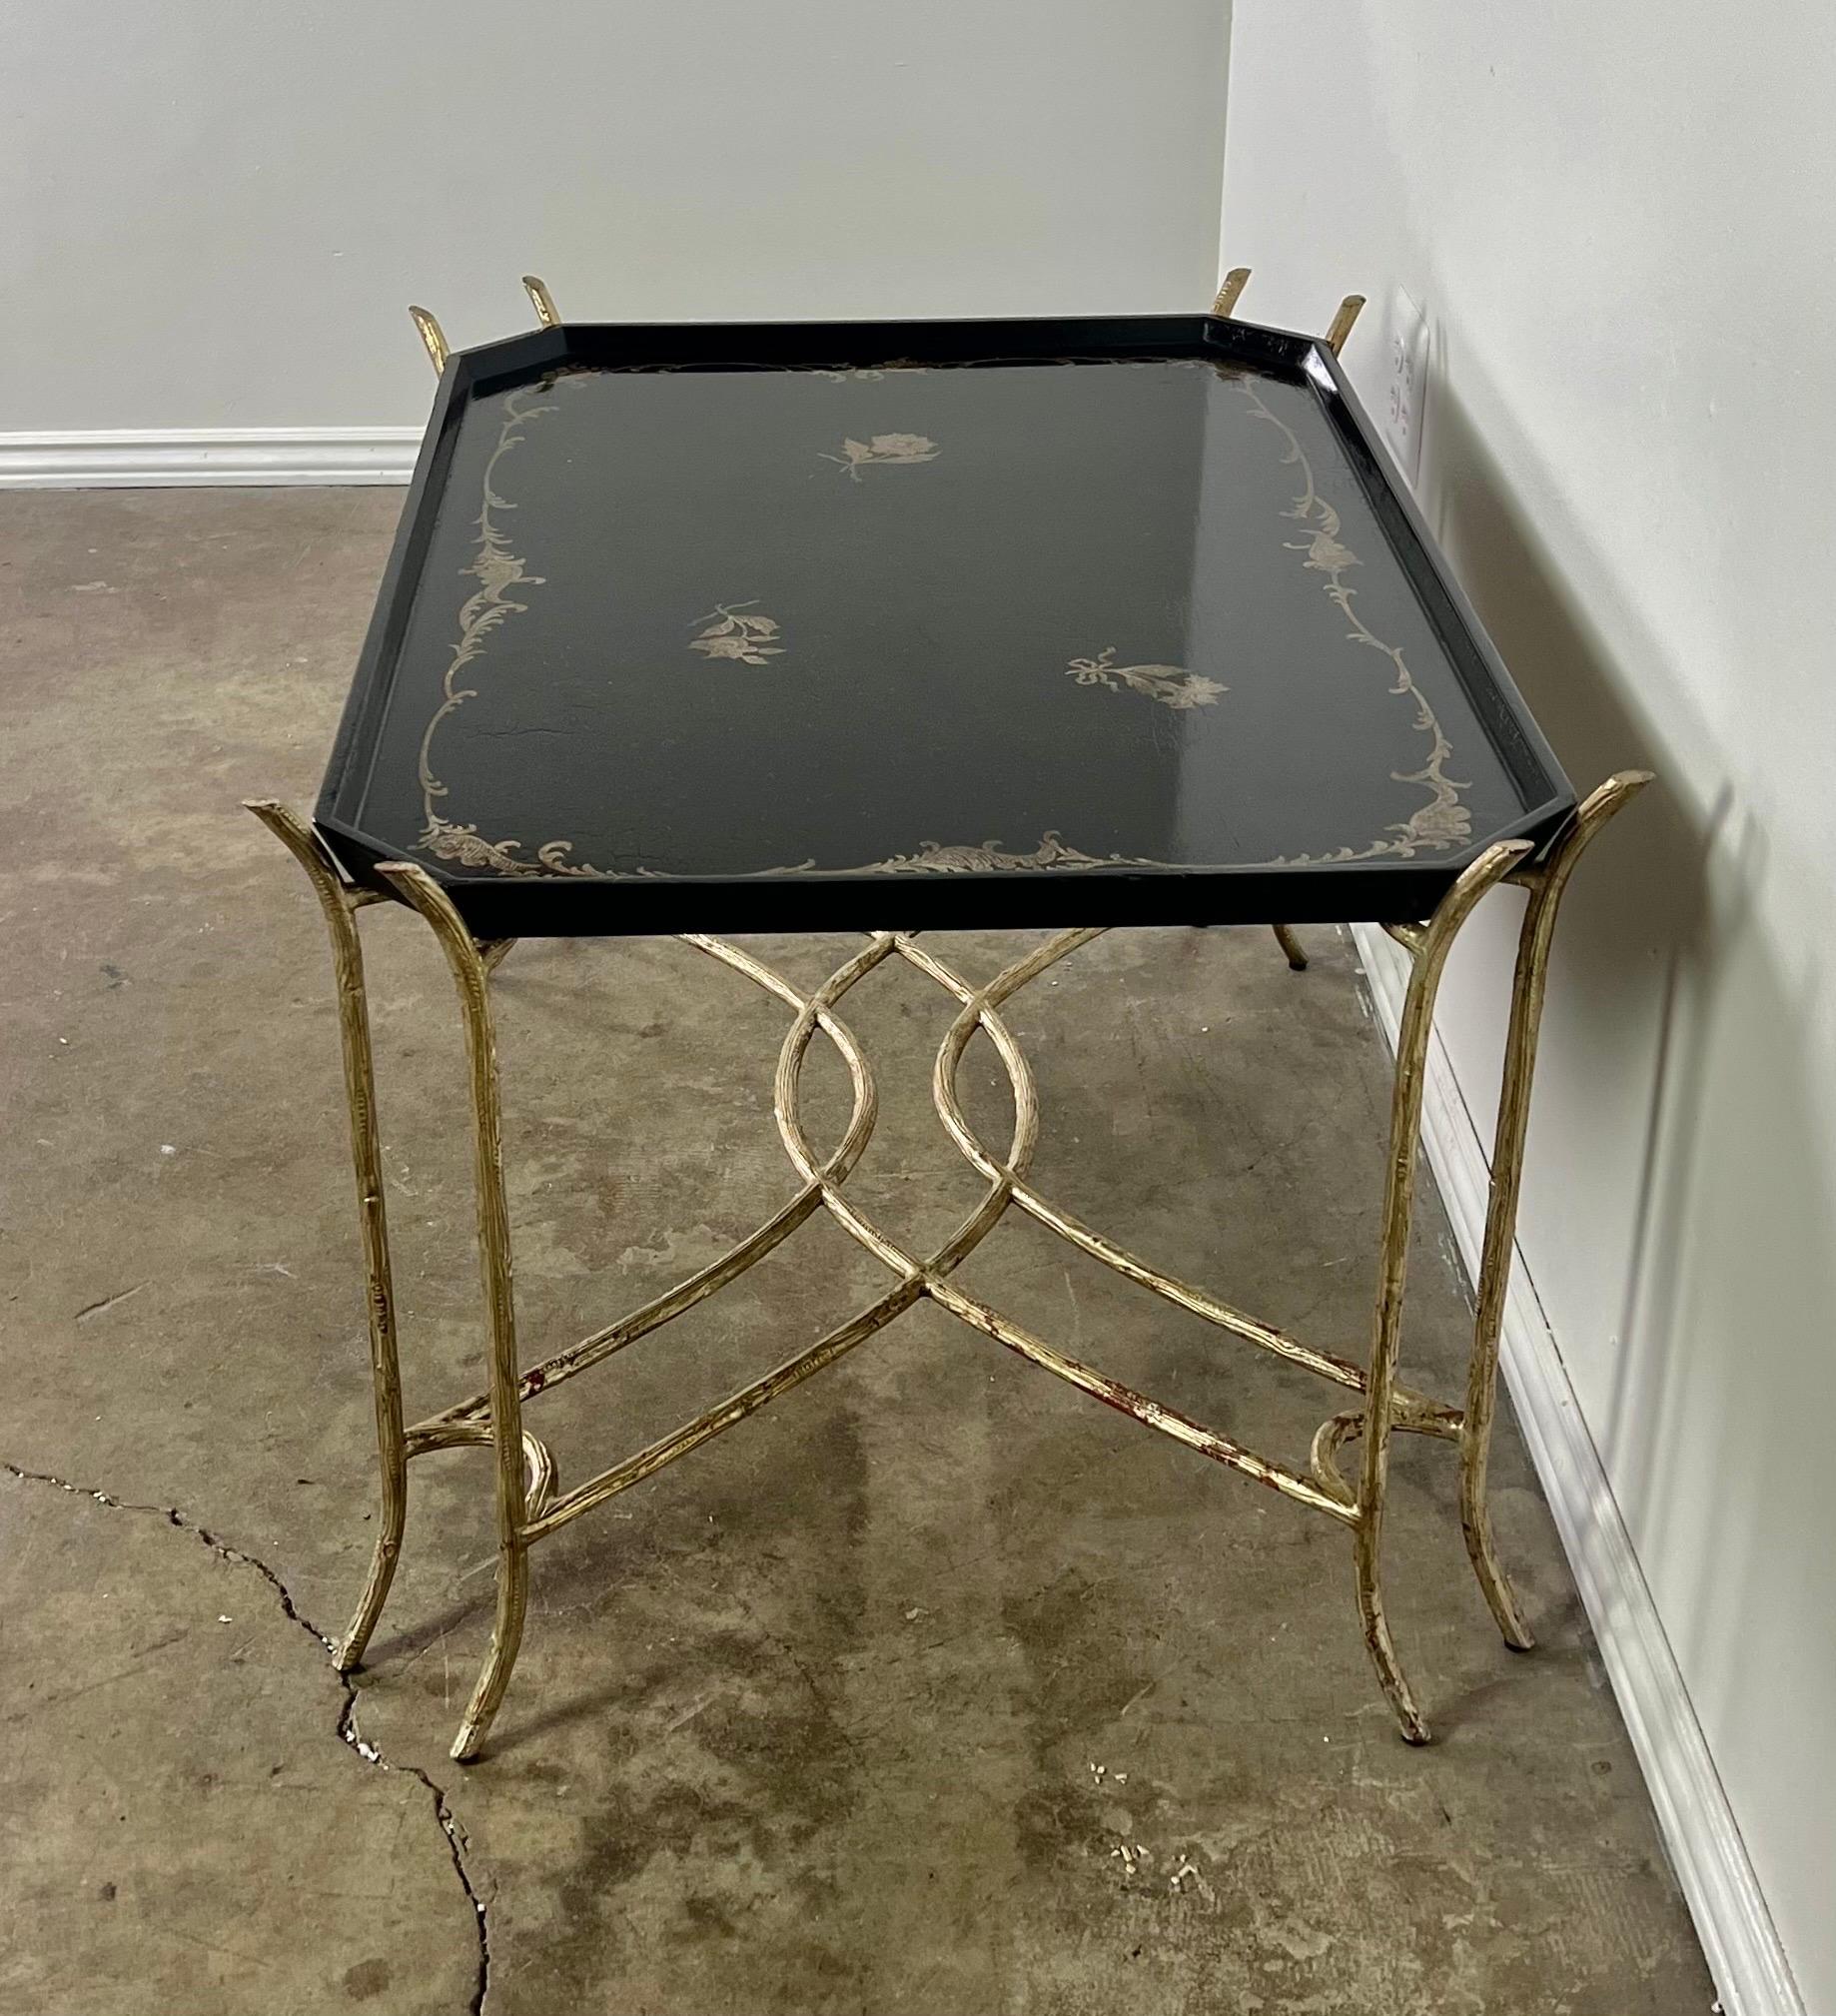 Chinoiserie Lacquered Tea Table on Metal Base by Ebanista For Sale 2